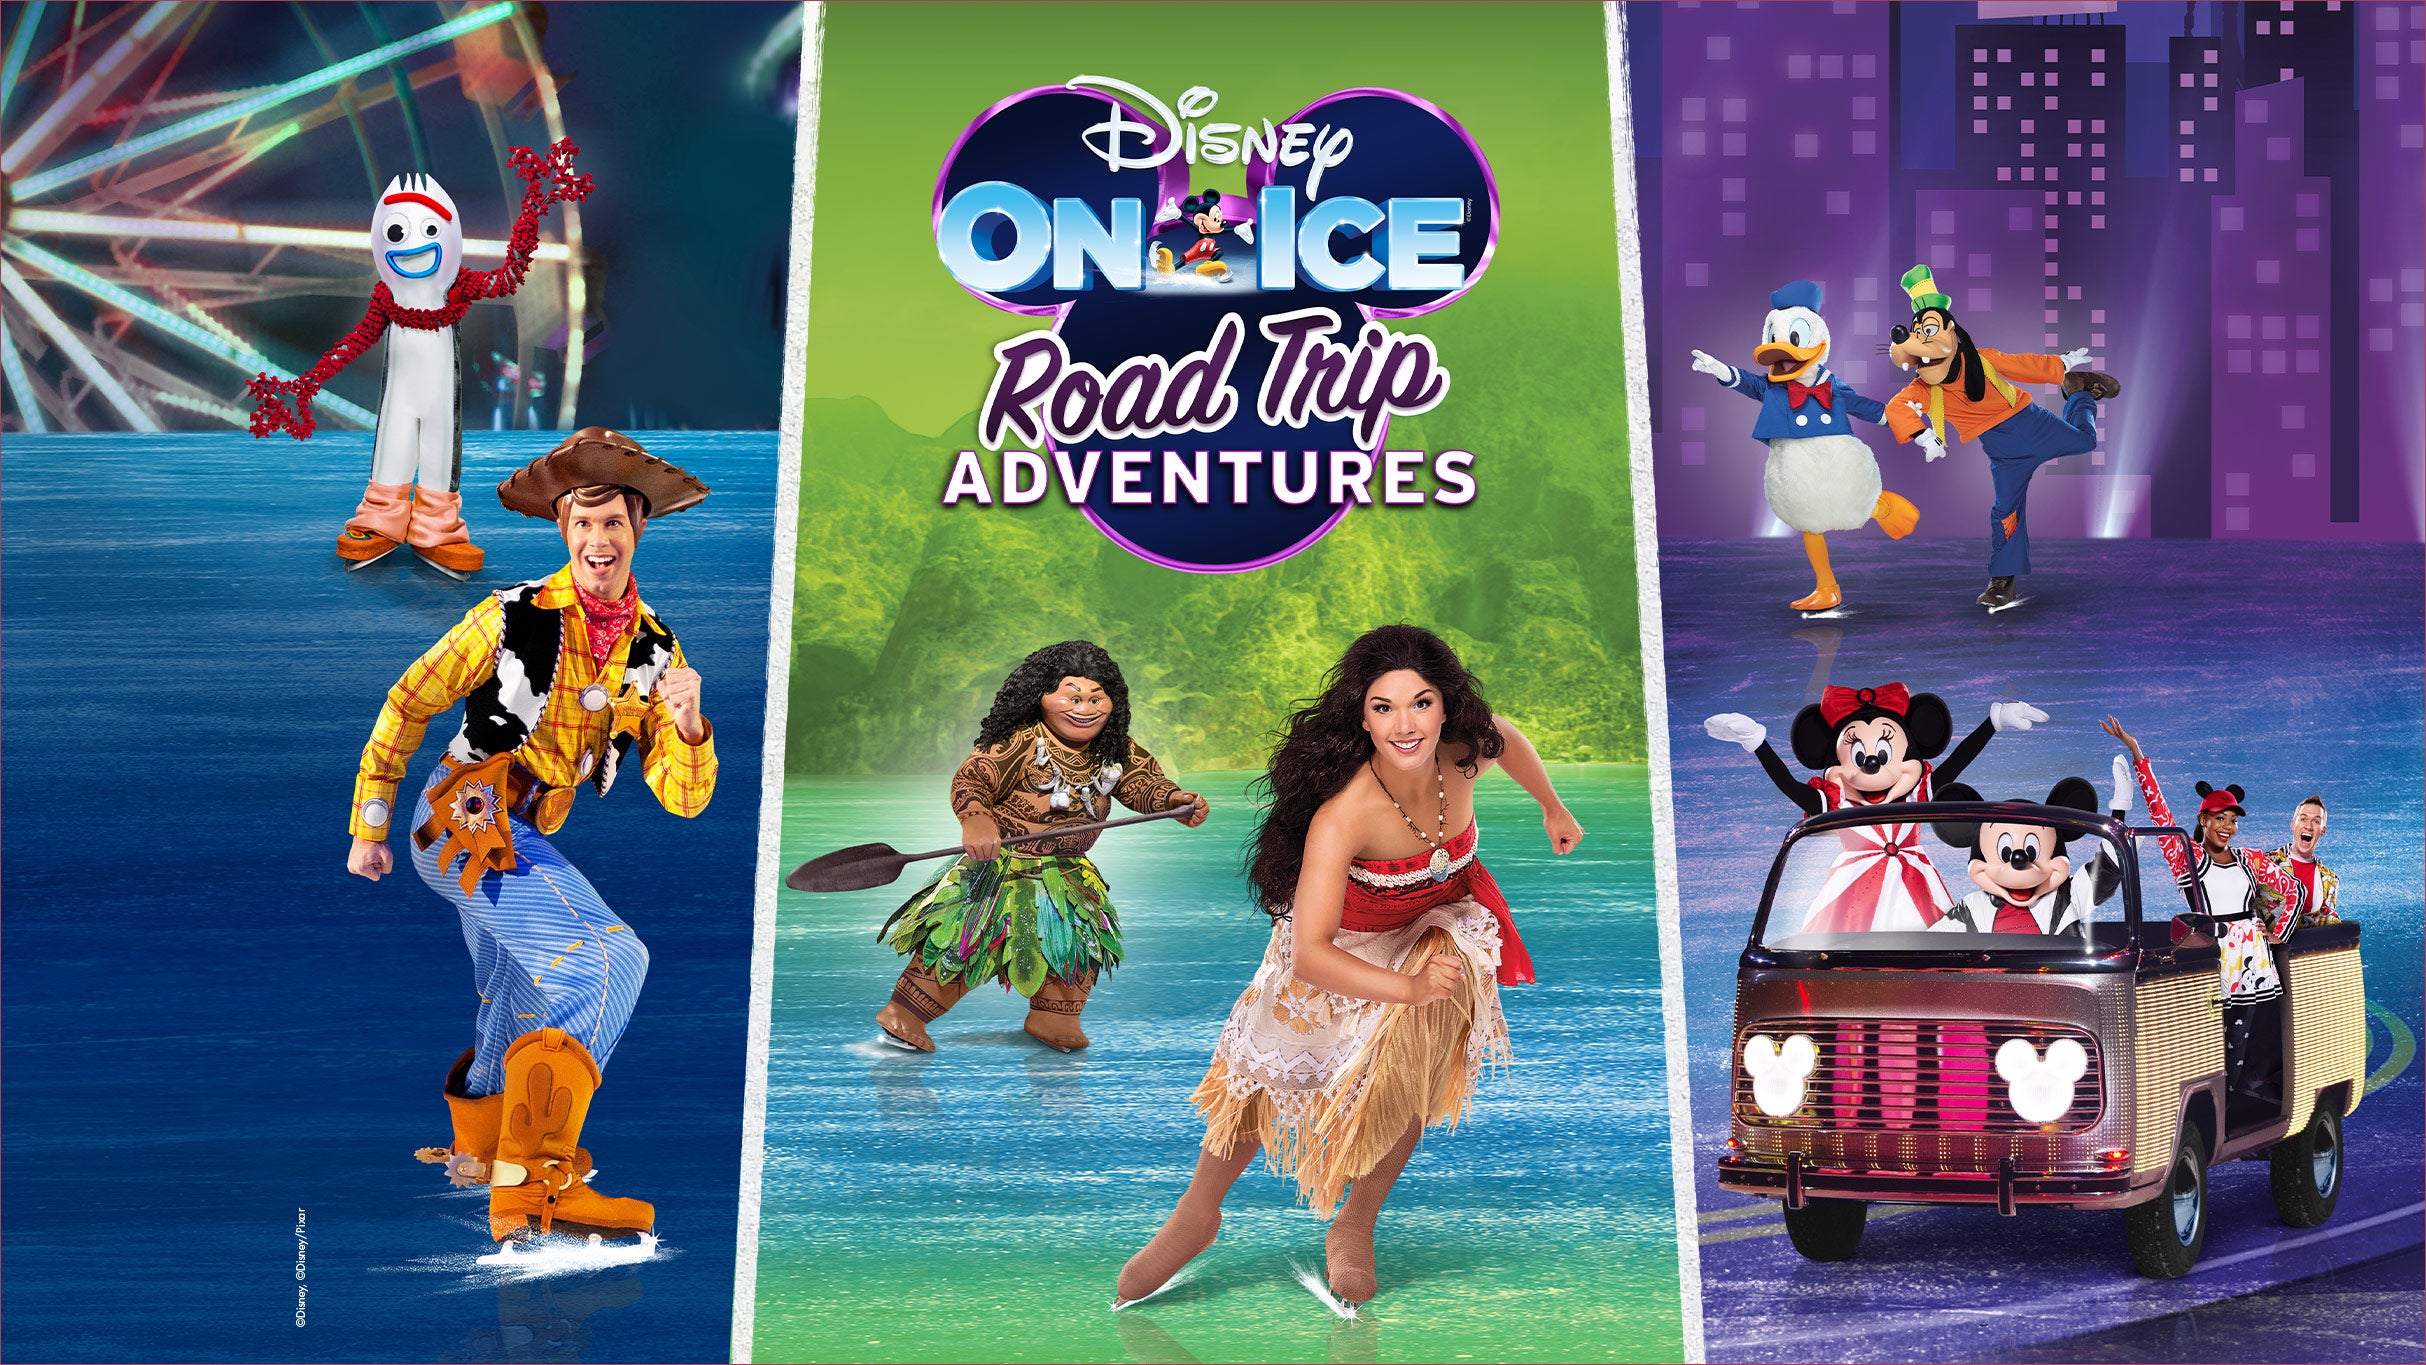 Disney On Ice presents Road Trip Adventures in Newcastle Upon Tyne promo photo for Venue presale offer code